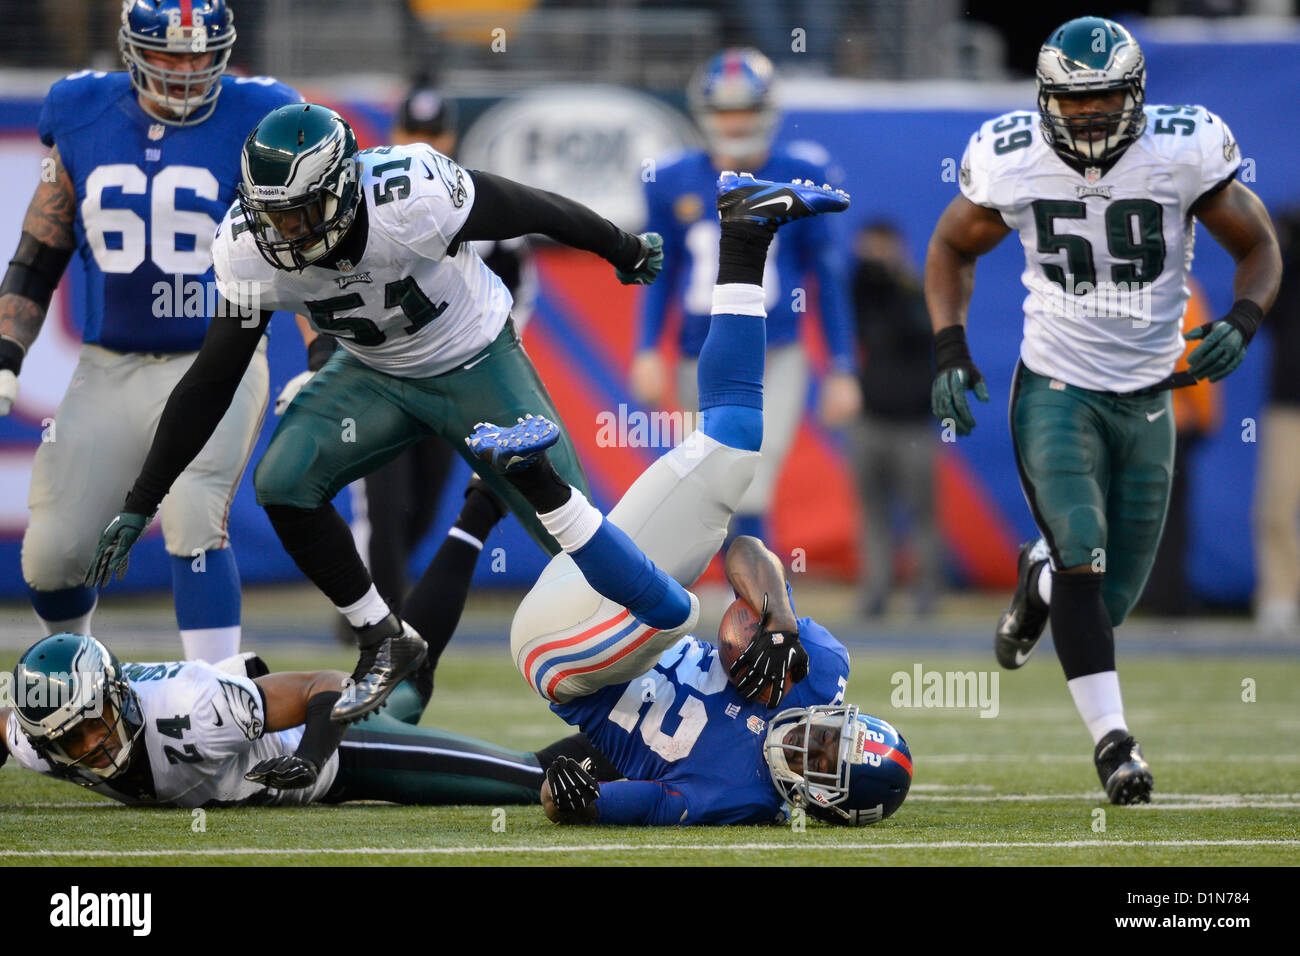 New Jersey, USA. 30 December 2012: New York Giants running back David Wilson (22) runs with the ball into Philadelphia Eagles cornerback Nnamdi Asomugha (24) and Philadelphia Eagles outside linebacker Jamar Chaney (51) during a week 17 NFL matchup between the Philadelphia Eagles and New York Giants at MetLife Stadium in East Rutherford, New Jersey. The Giants defeated the Eagles 42-7. Stock Photo